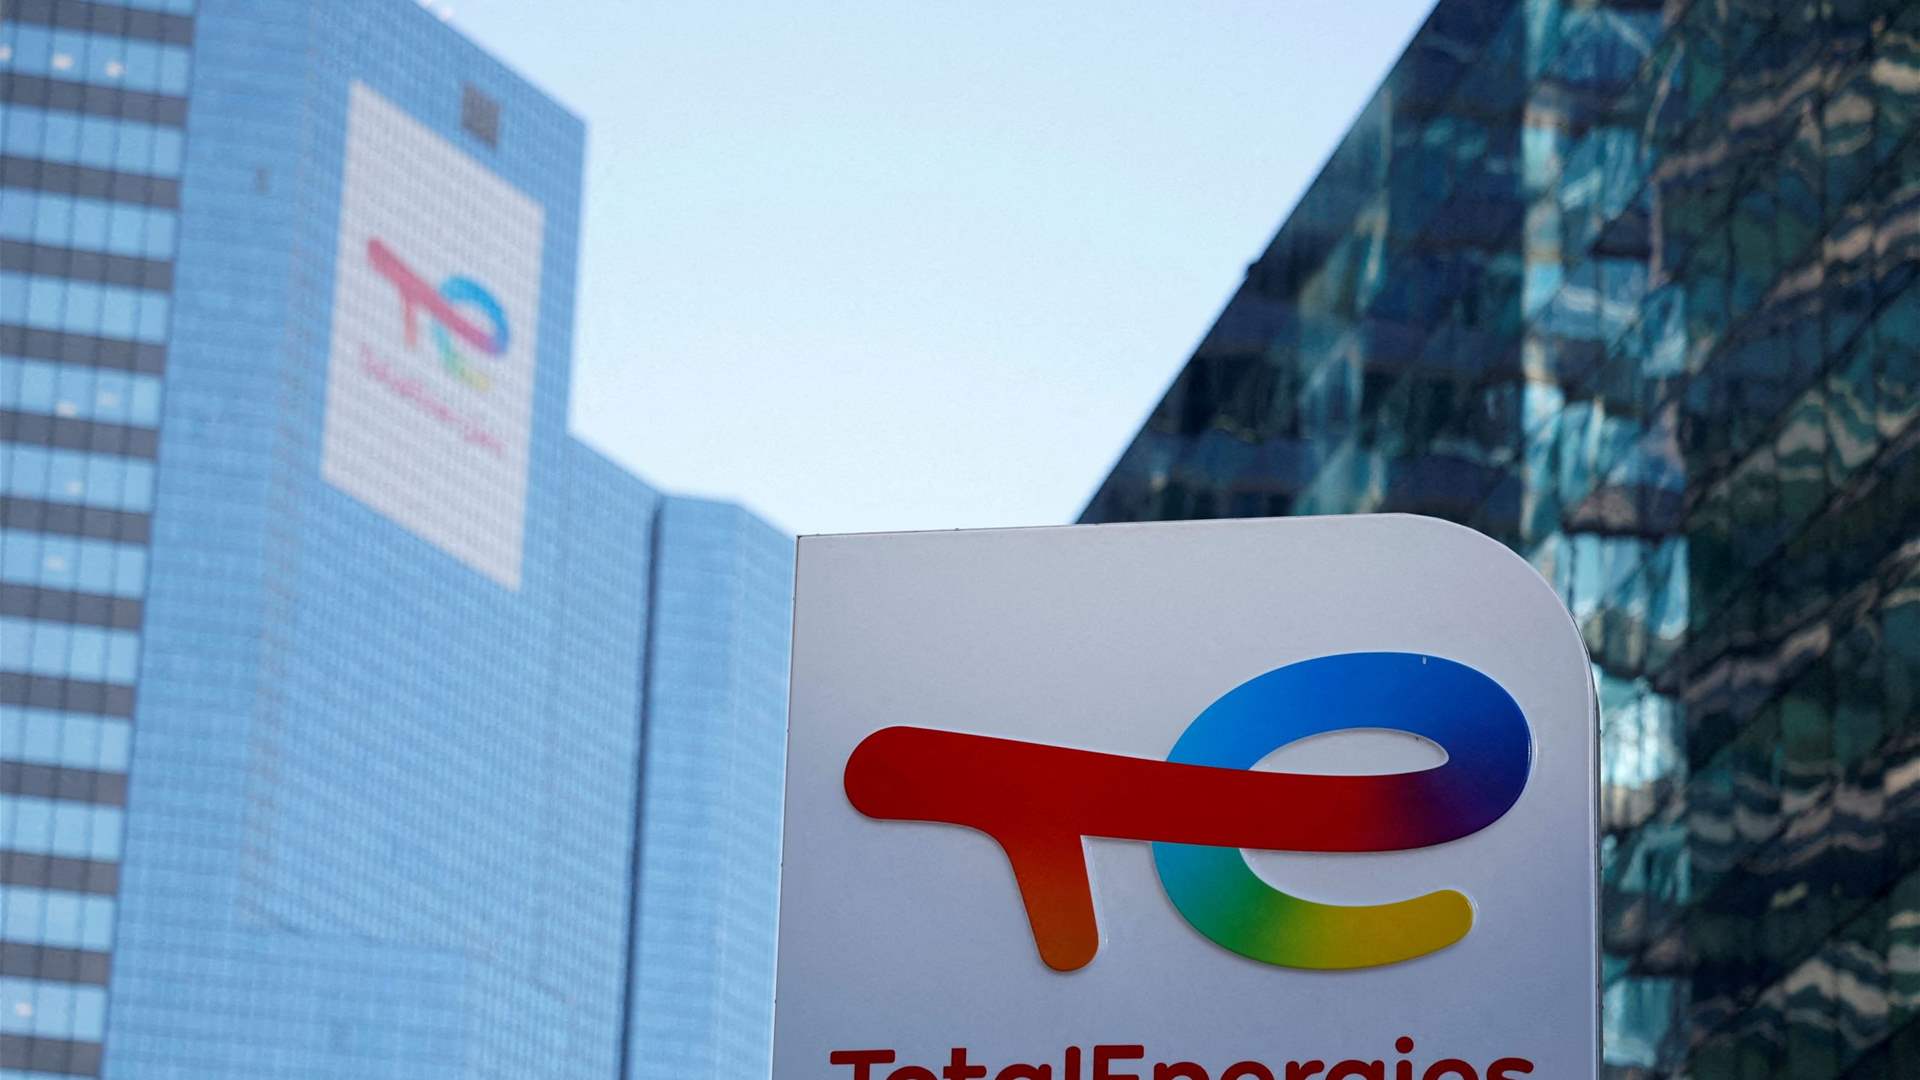 TotalEnergies withdraws from two South Africa gas fields